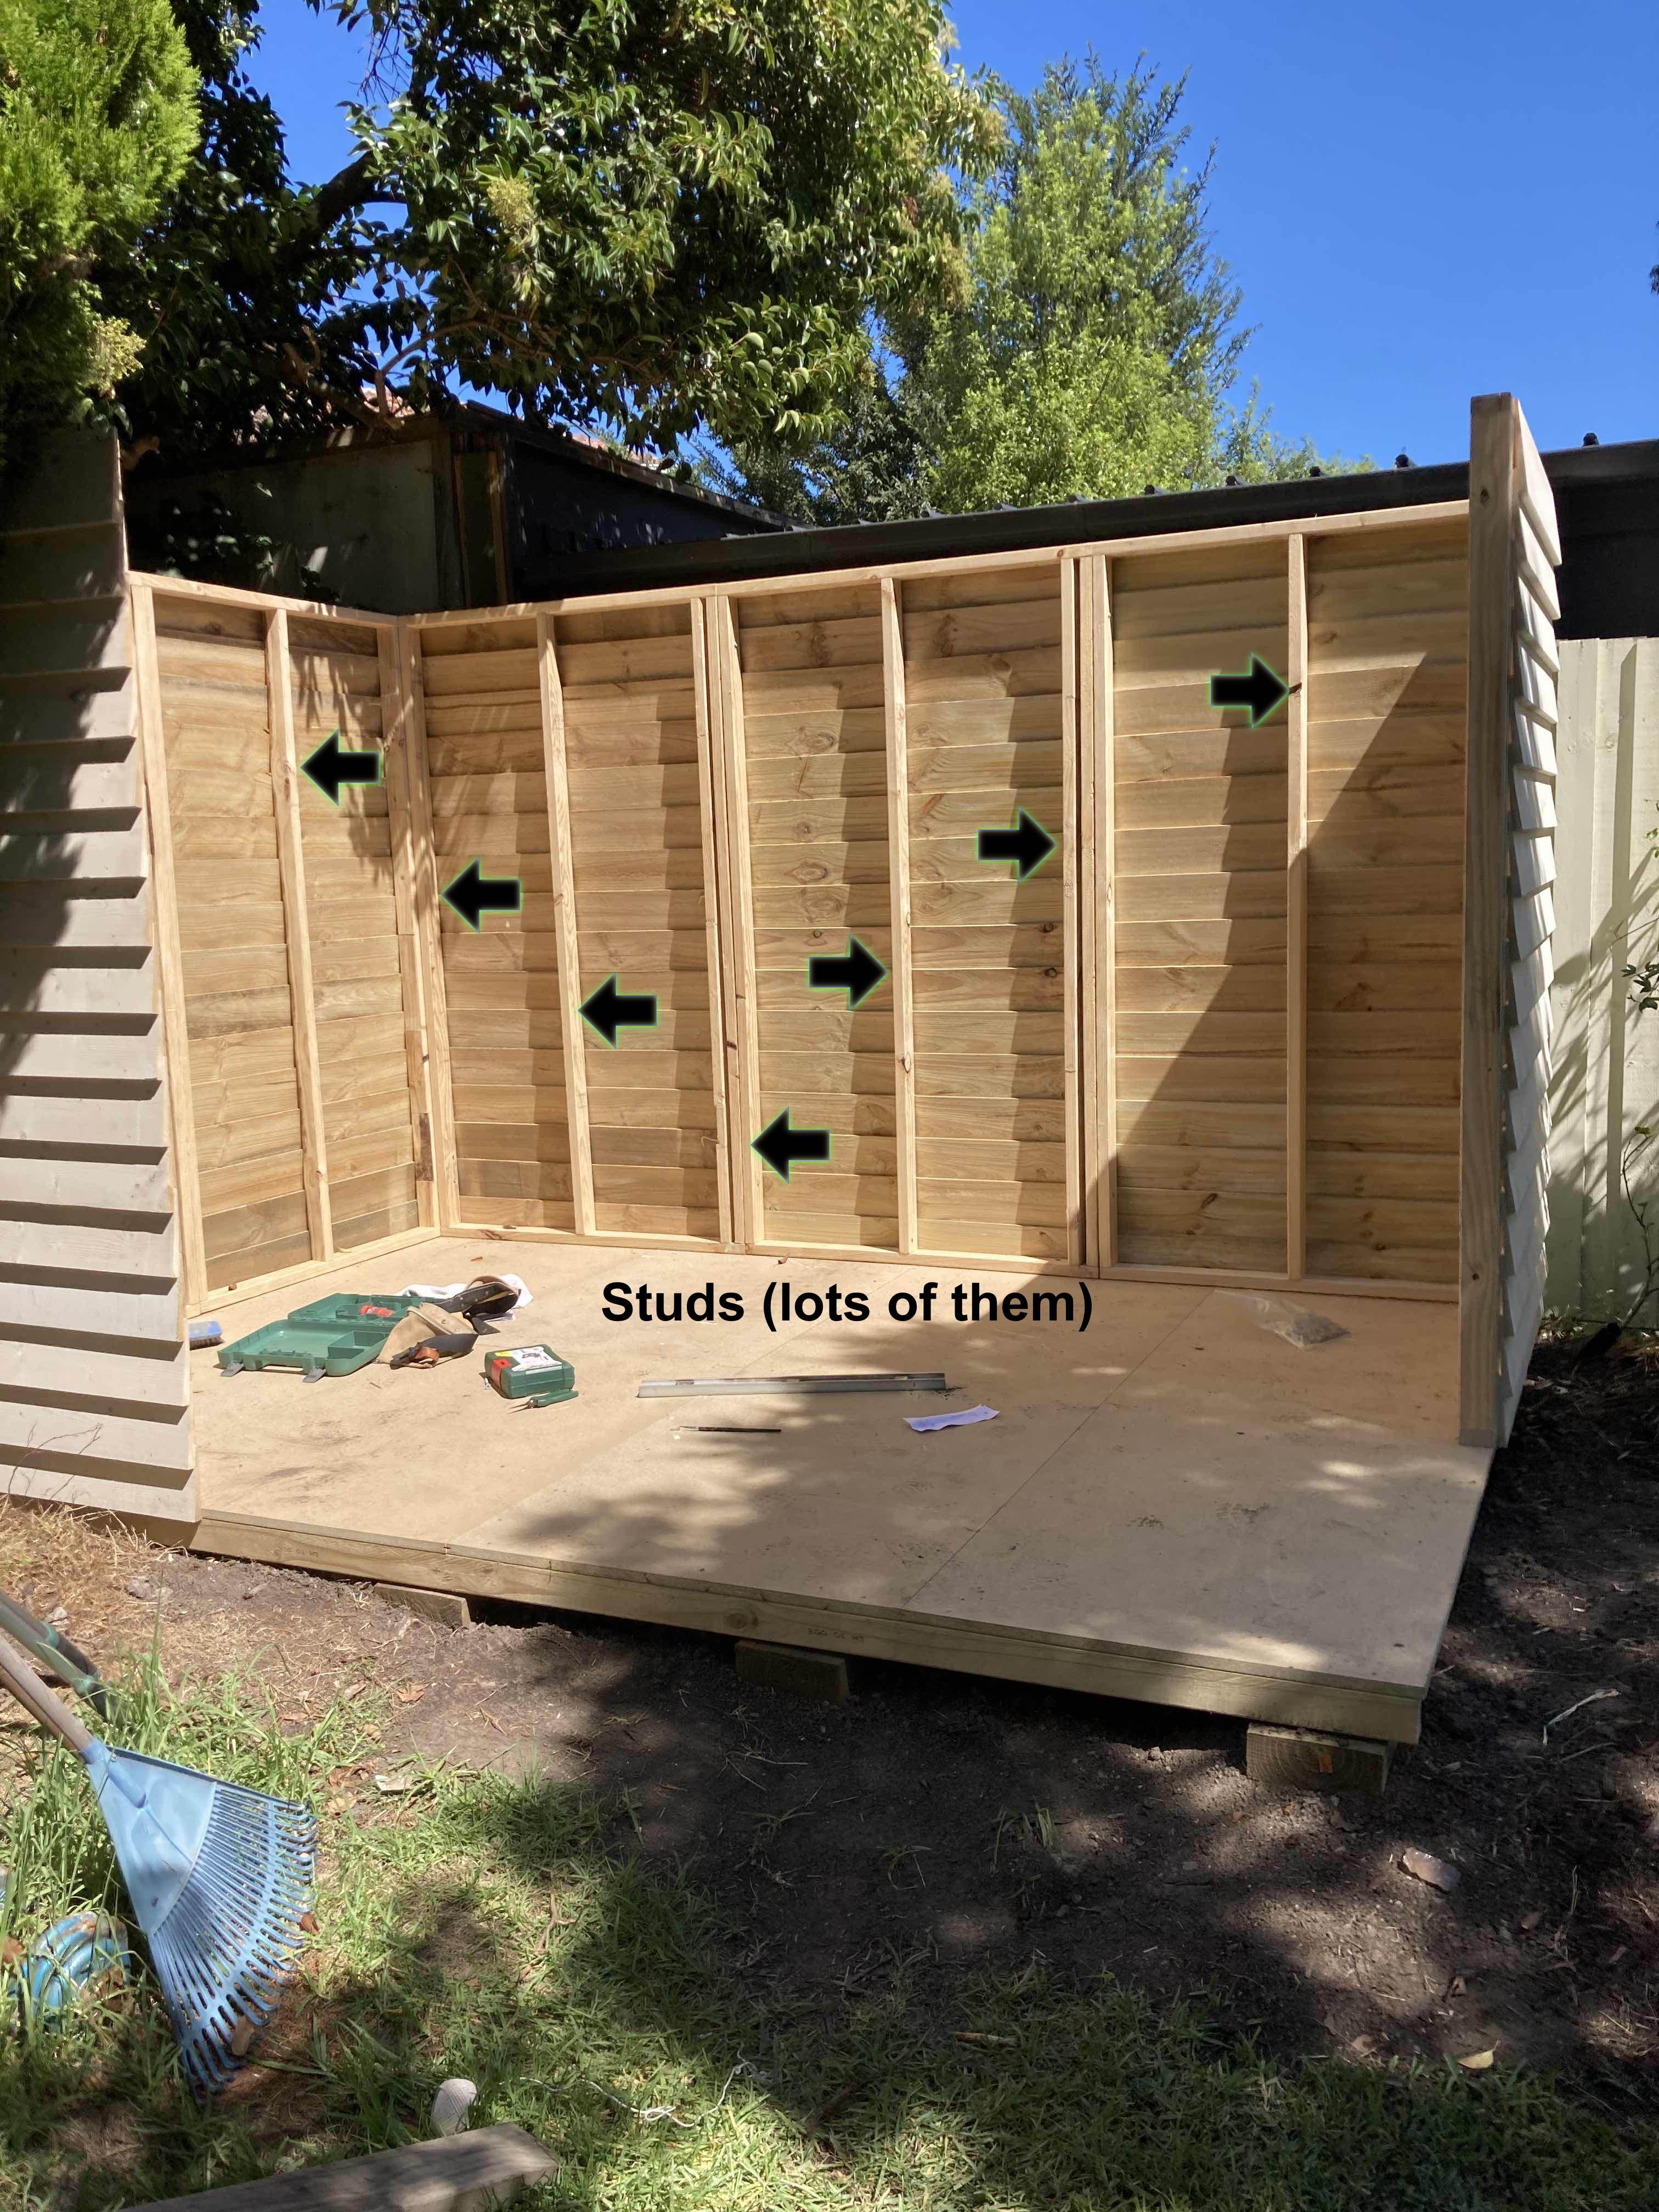 Easy to assemble!
Pre-made panels slot together easily. 
Most of the construction is done from inside the shed.
The end result: a good, solid functional shed!